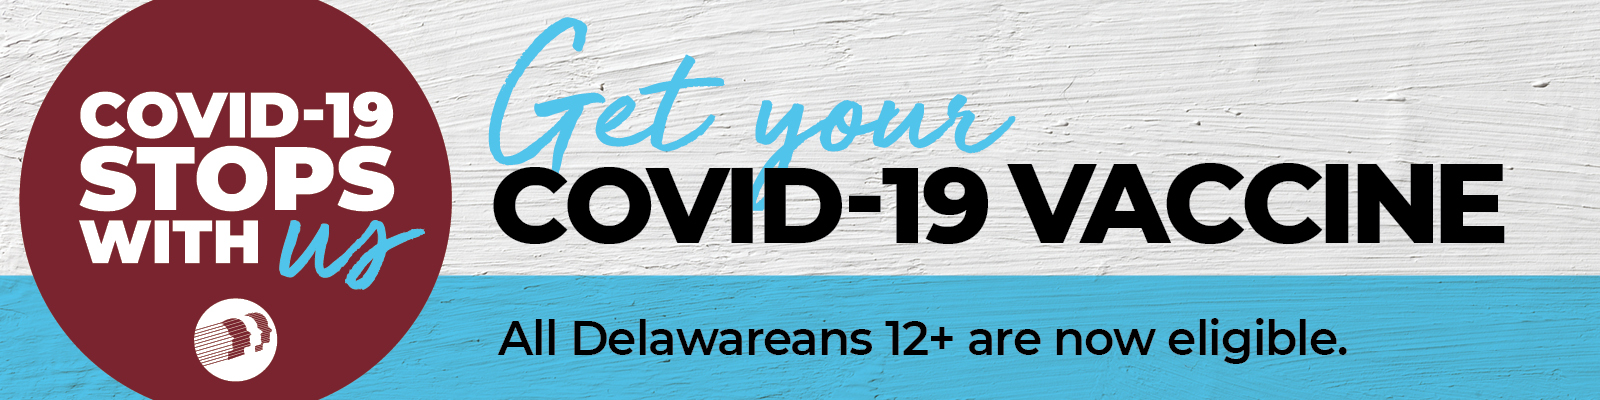 Get your COVID-19 Vaccine. All Delawareans 12+ are now eligible.